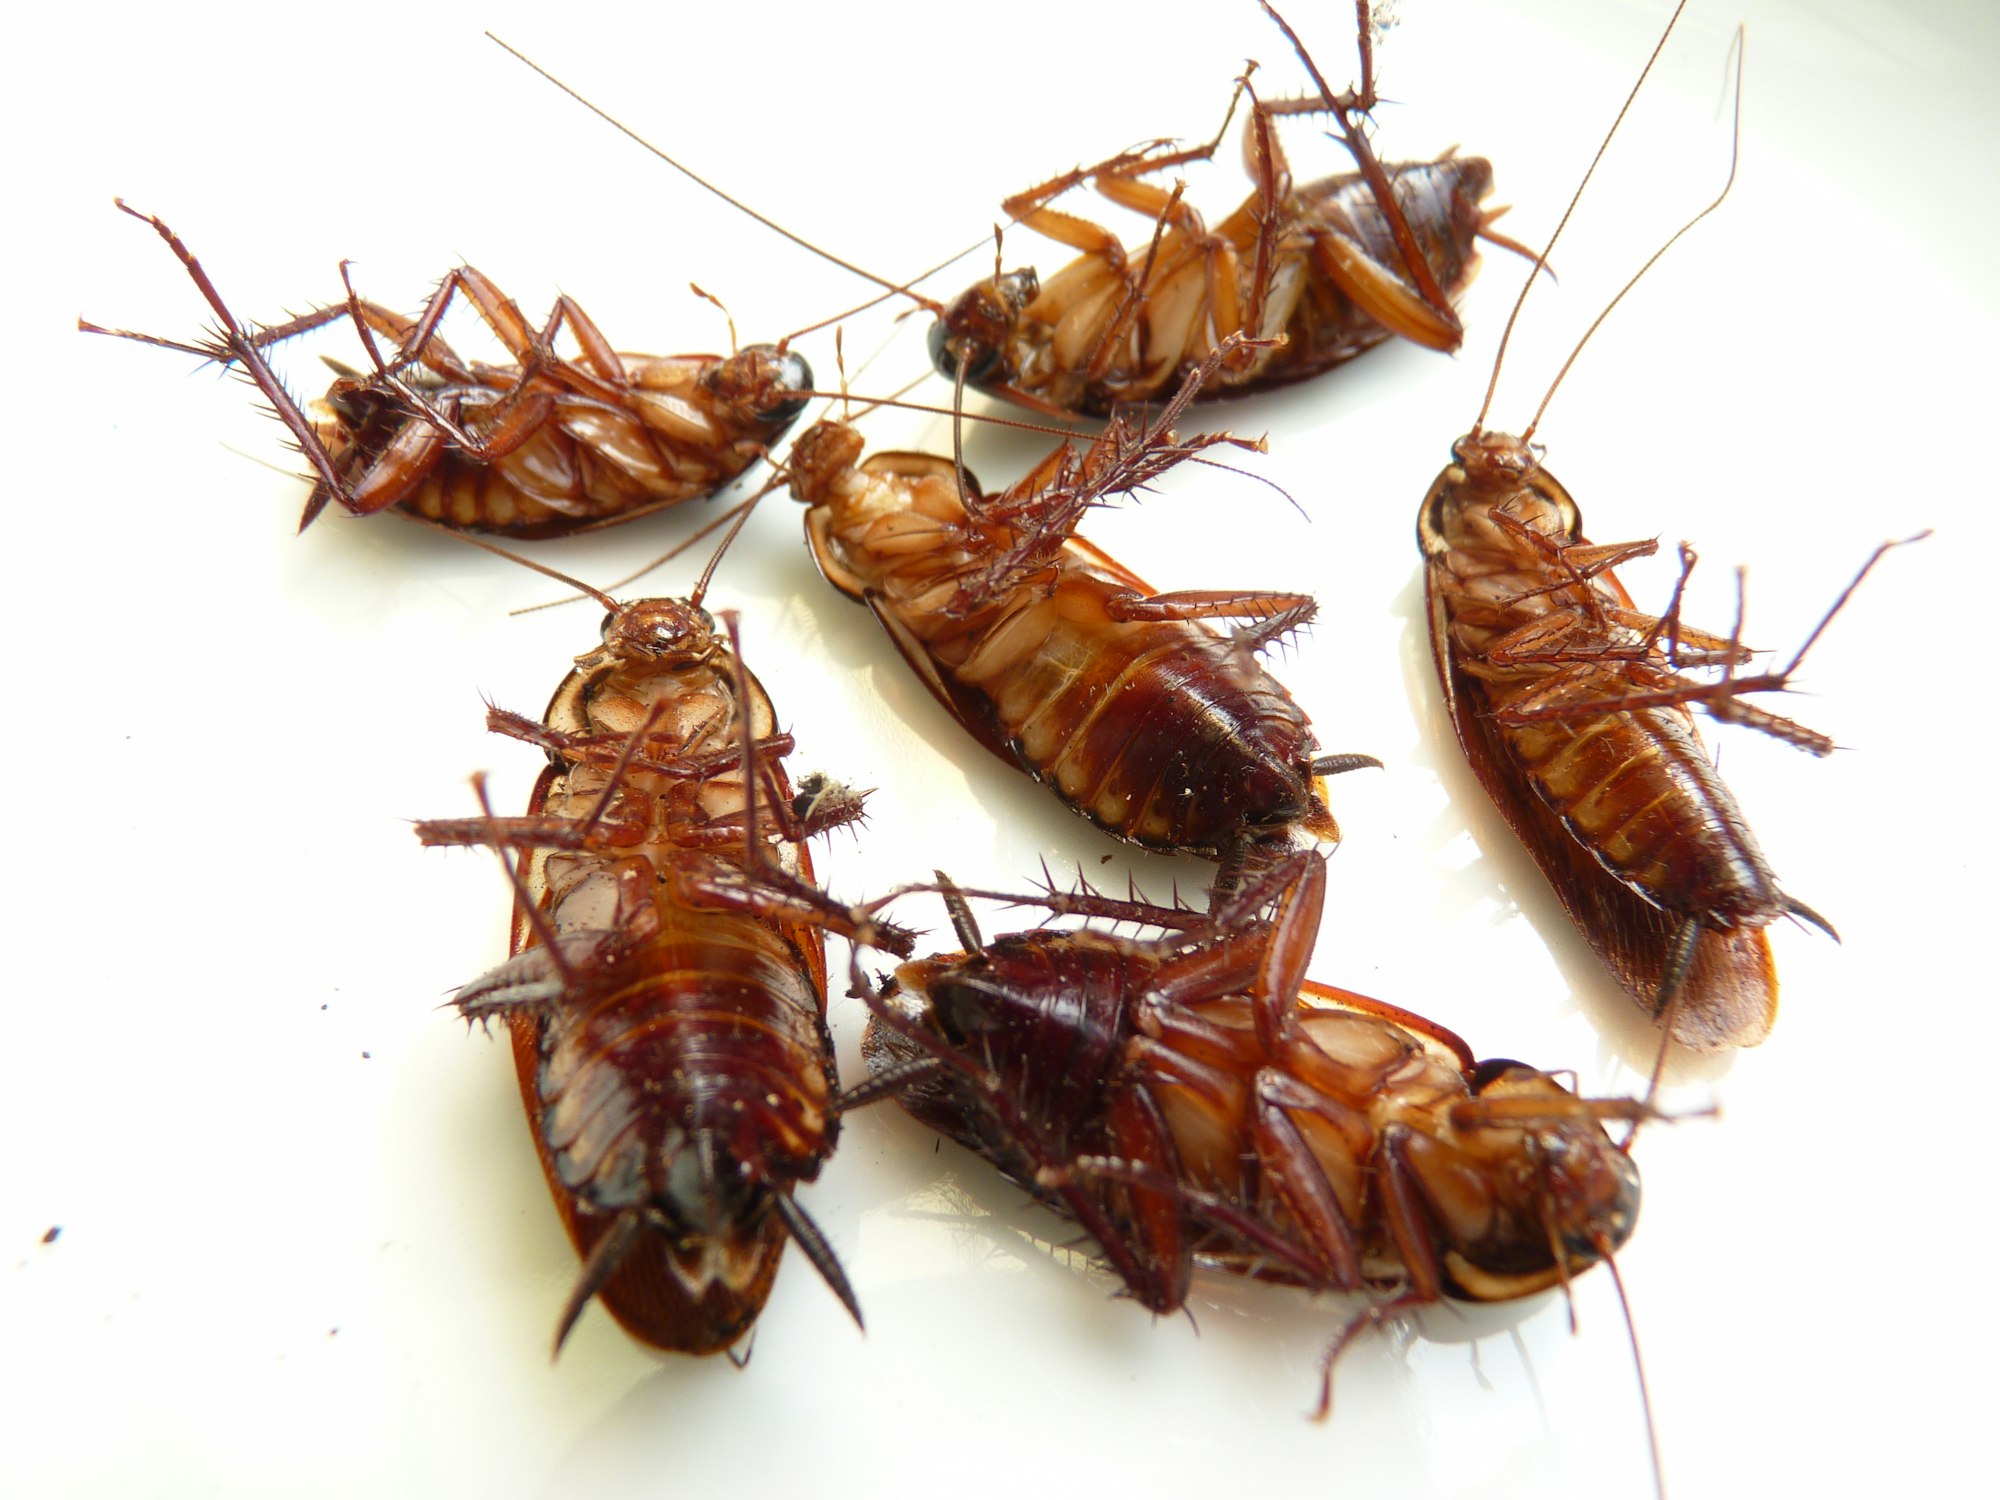 Macro shot of cockroaches on a white surface